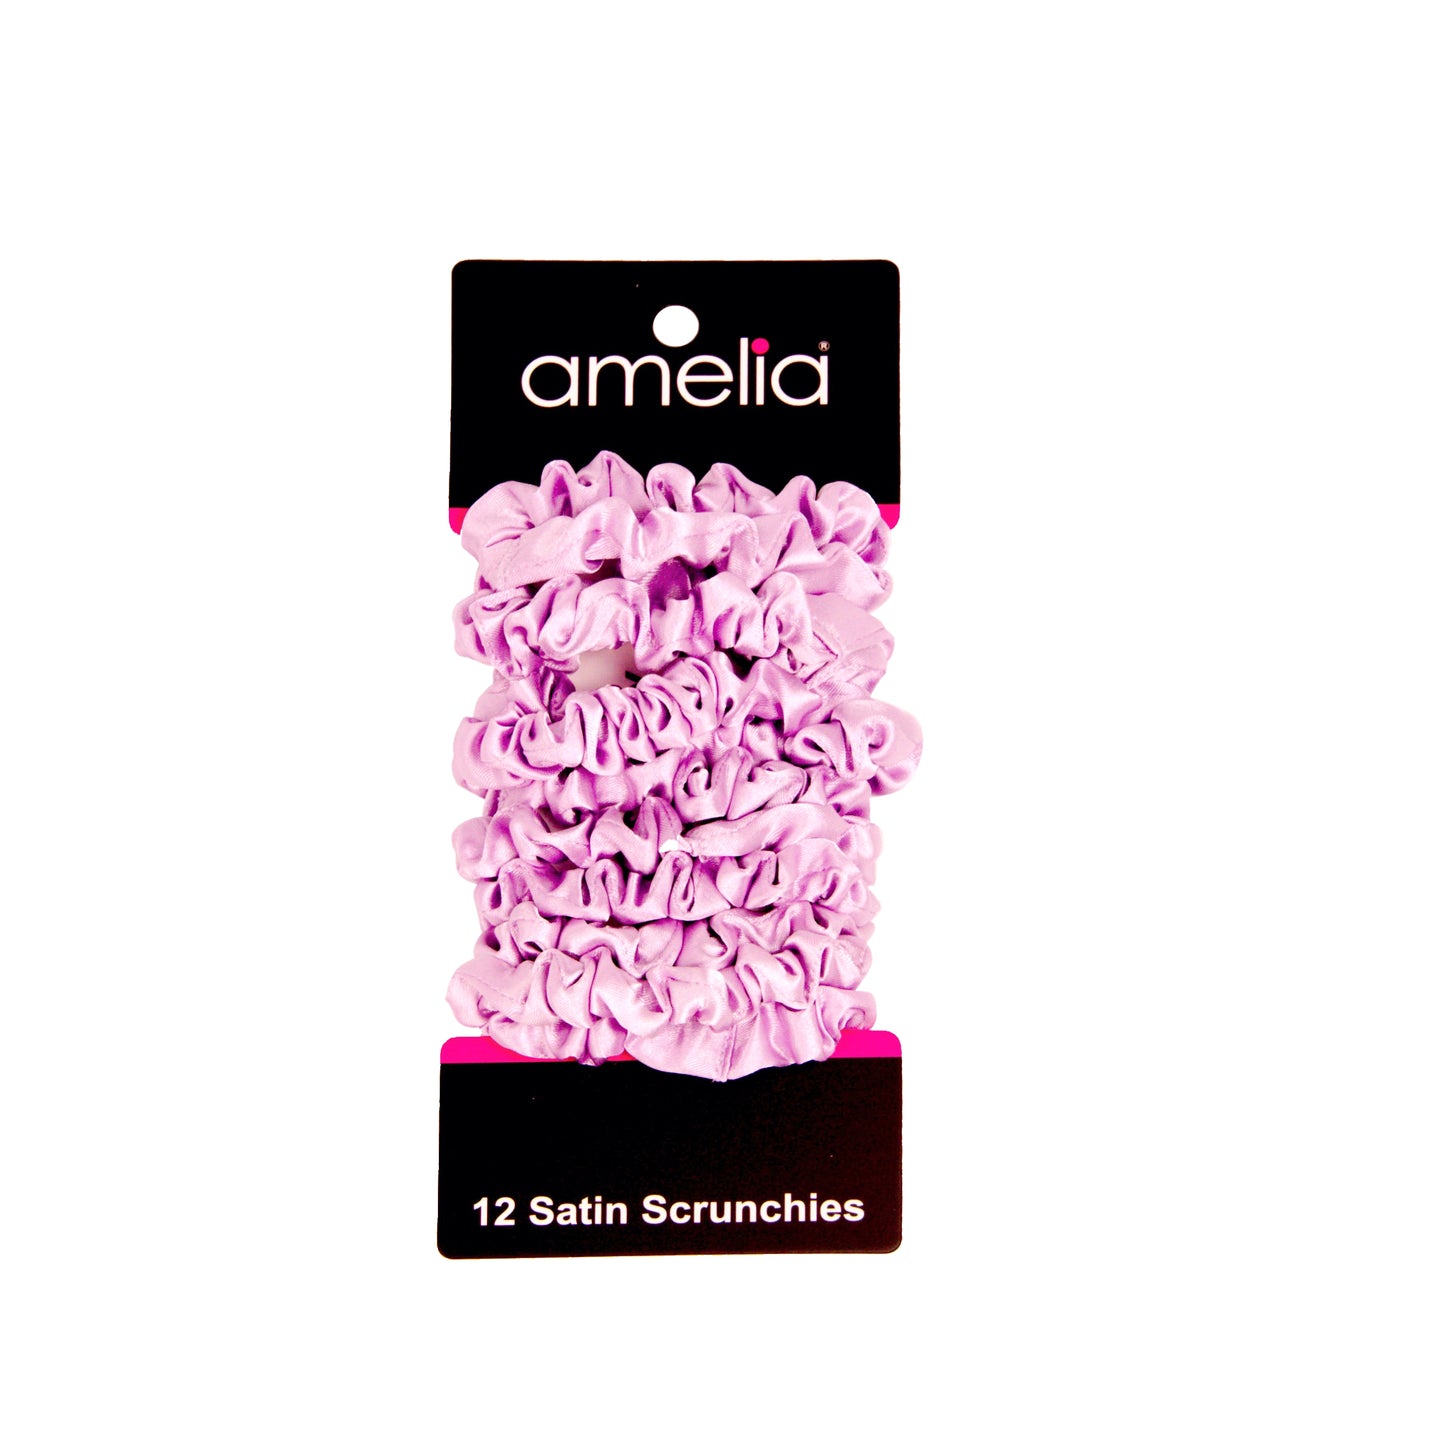 Amelia Beauty, Pink Satin Scrunchies, 2.25in Diameter, Gentle on Hair, Strong Hold, No Snag, No Dents or Creases. 12 Pack